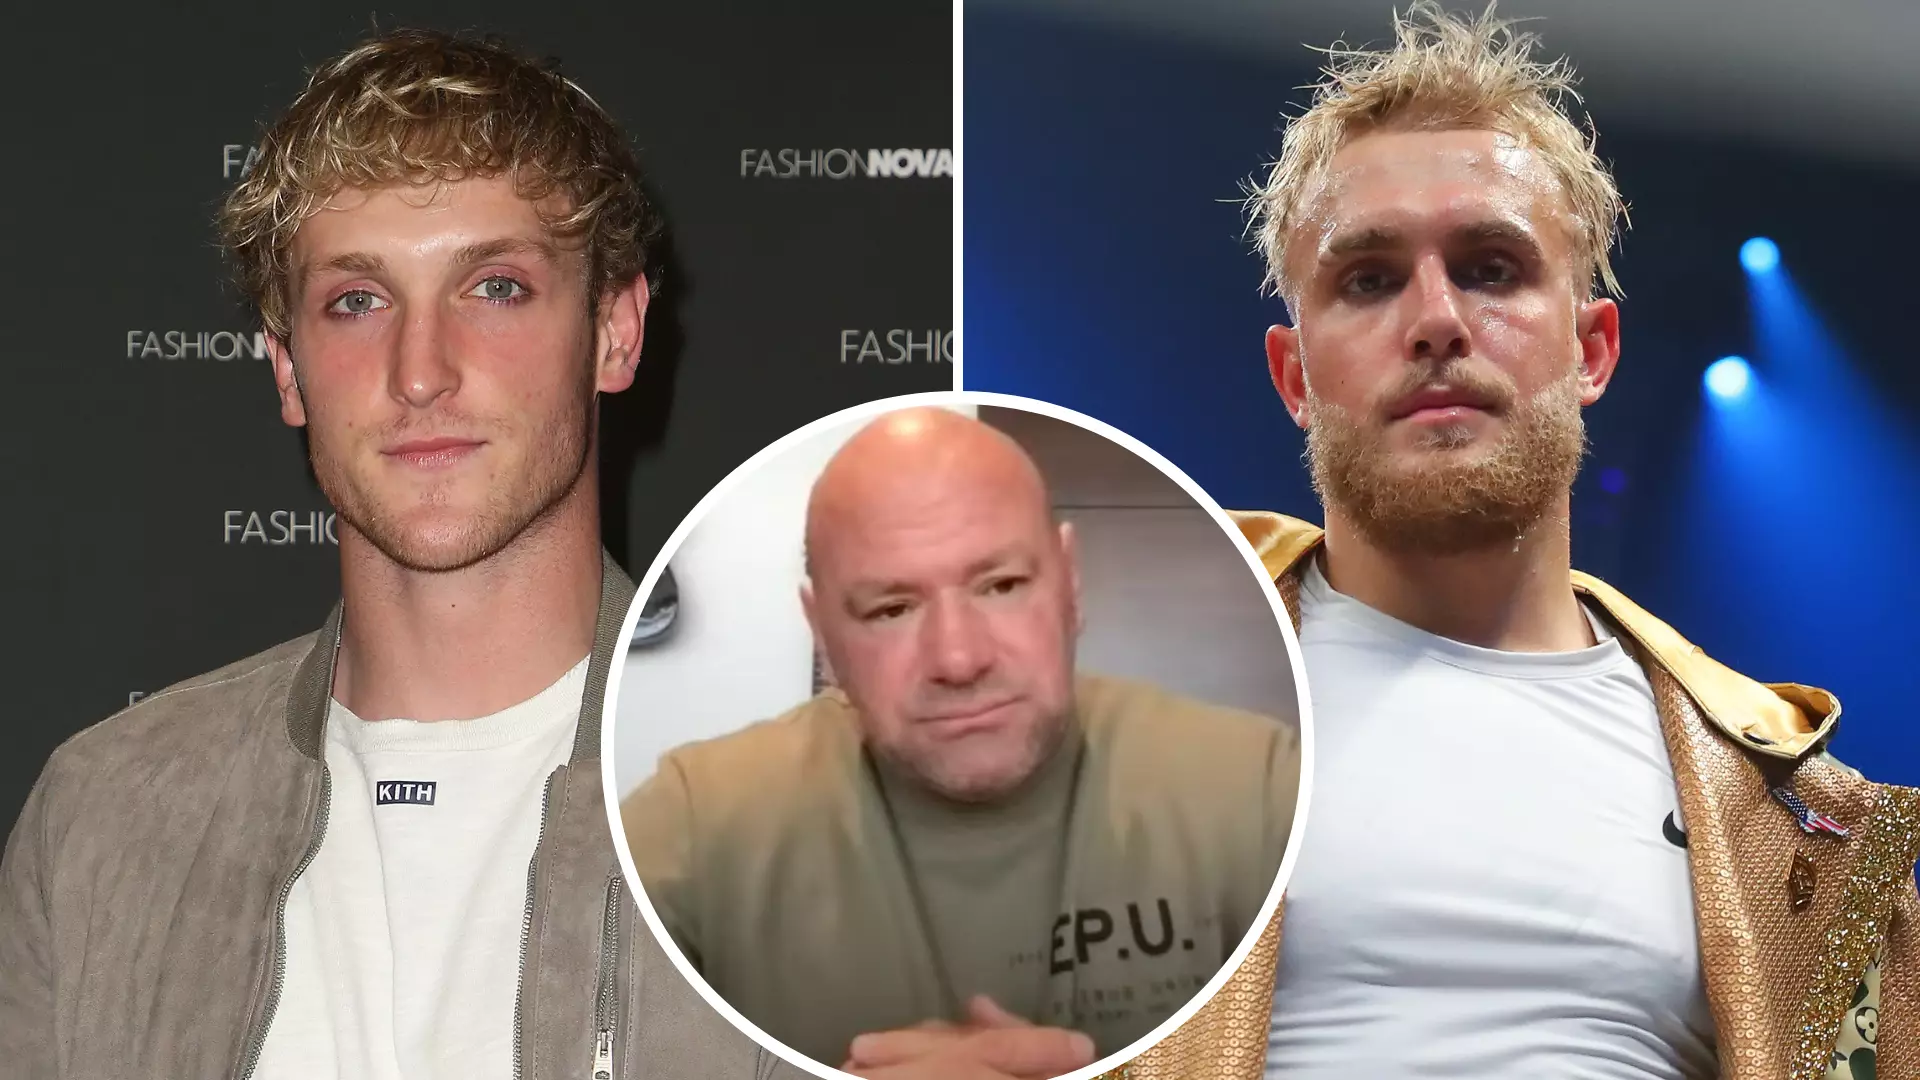 UFC President Dana White Drops Scathing Attack On Brothers Jake And Logan Paul